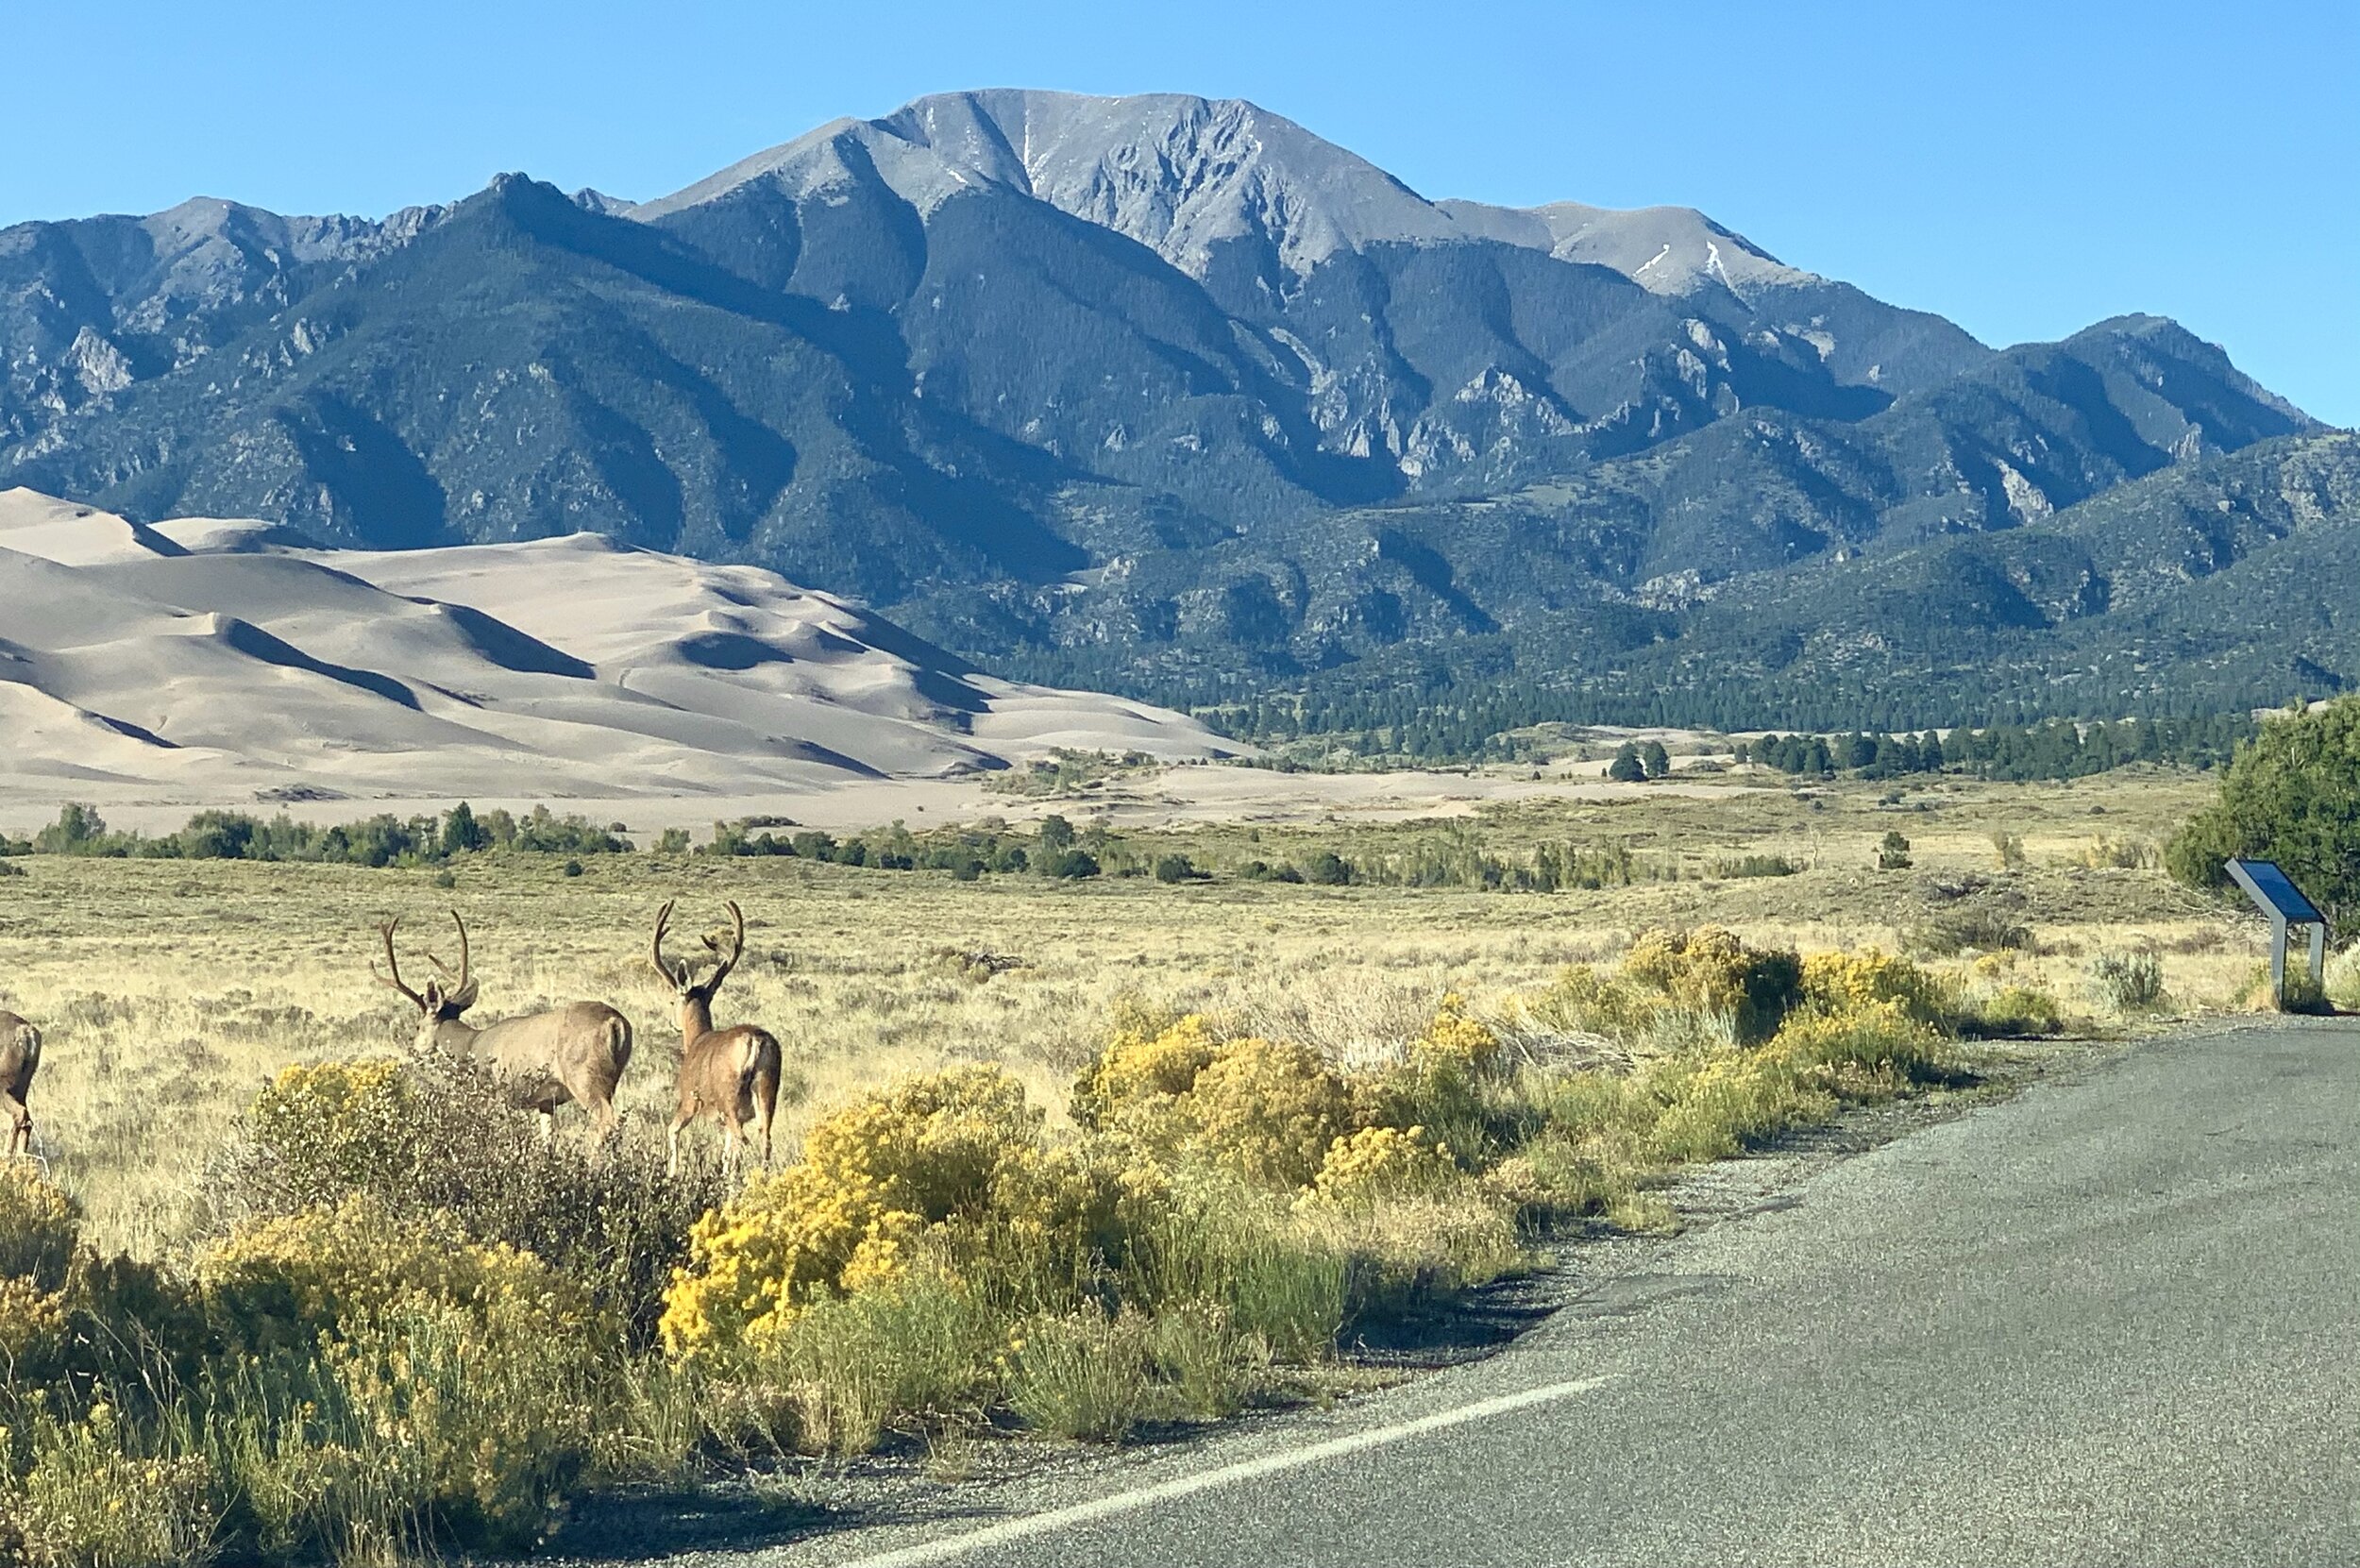  Over 30 square miles of sand dunes appear as a “sea of sand” at what is now  Great Sand Dunes National Park.  These unique dunes are created by the continuous work of water and wind moving sand, where there were once lakes. These dunes continue to g